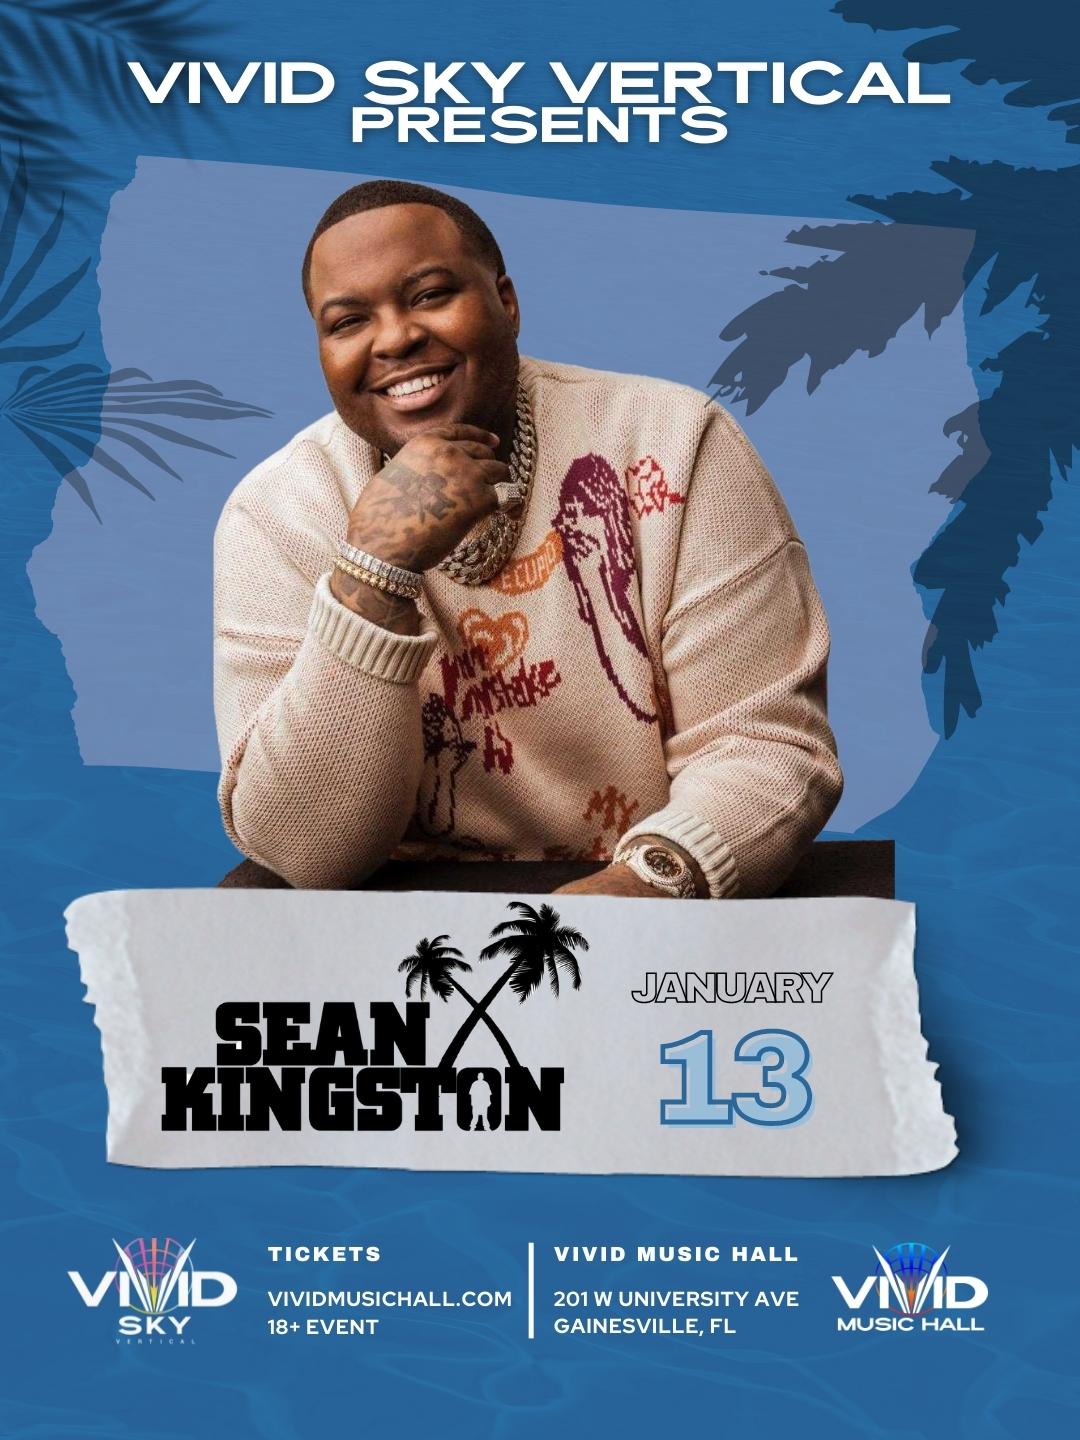 Sean Kingston Tickets at Vivid Music Hall in Gainesville by Vivid Sky